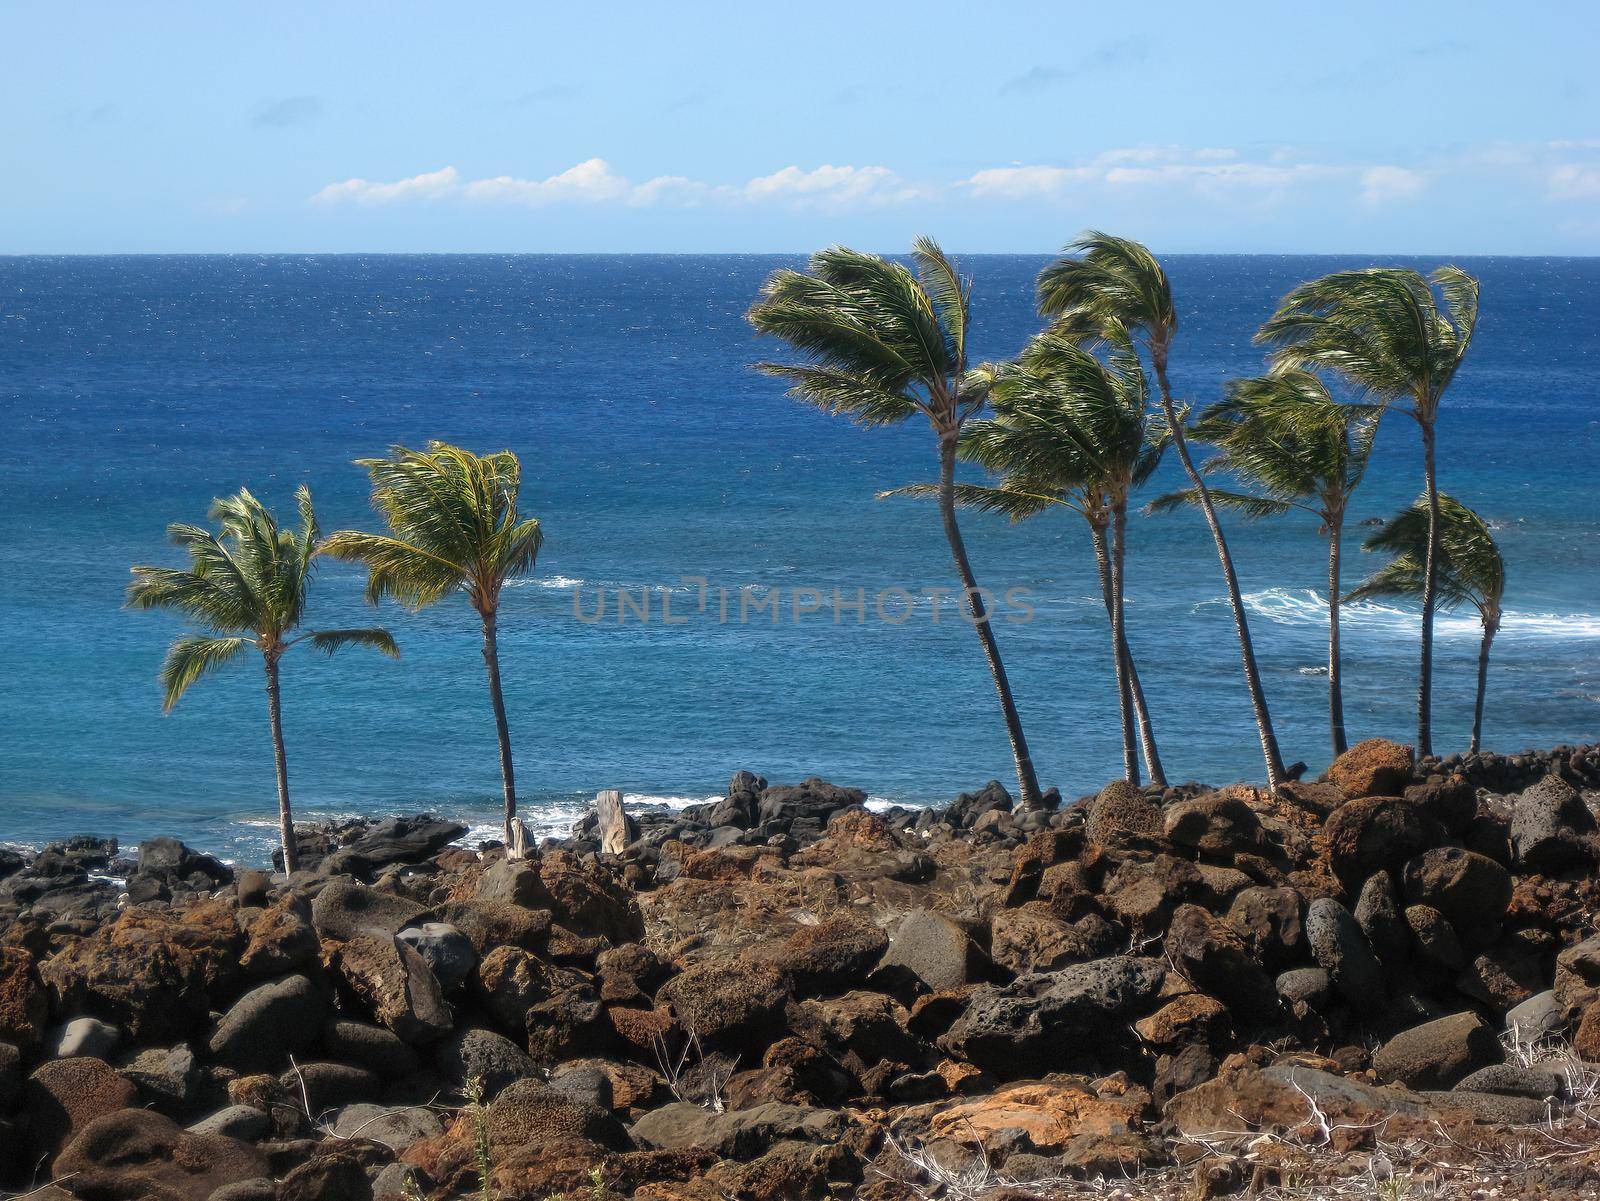 Pam trees blow in the wind along the shores of the Big Island in Hawaii by markvandam